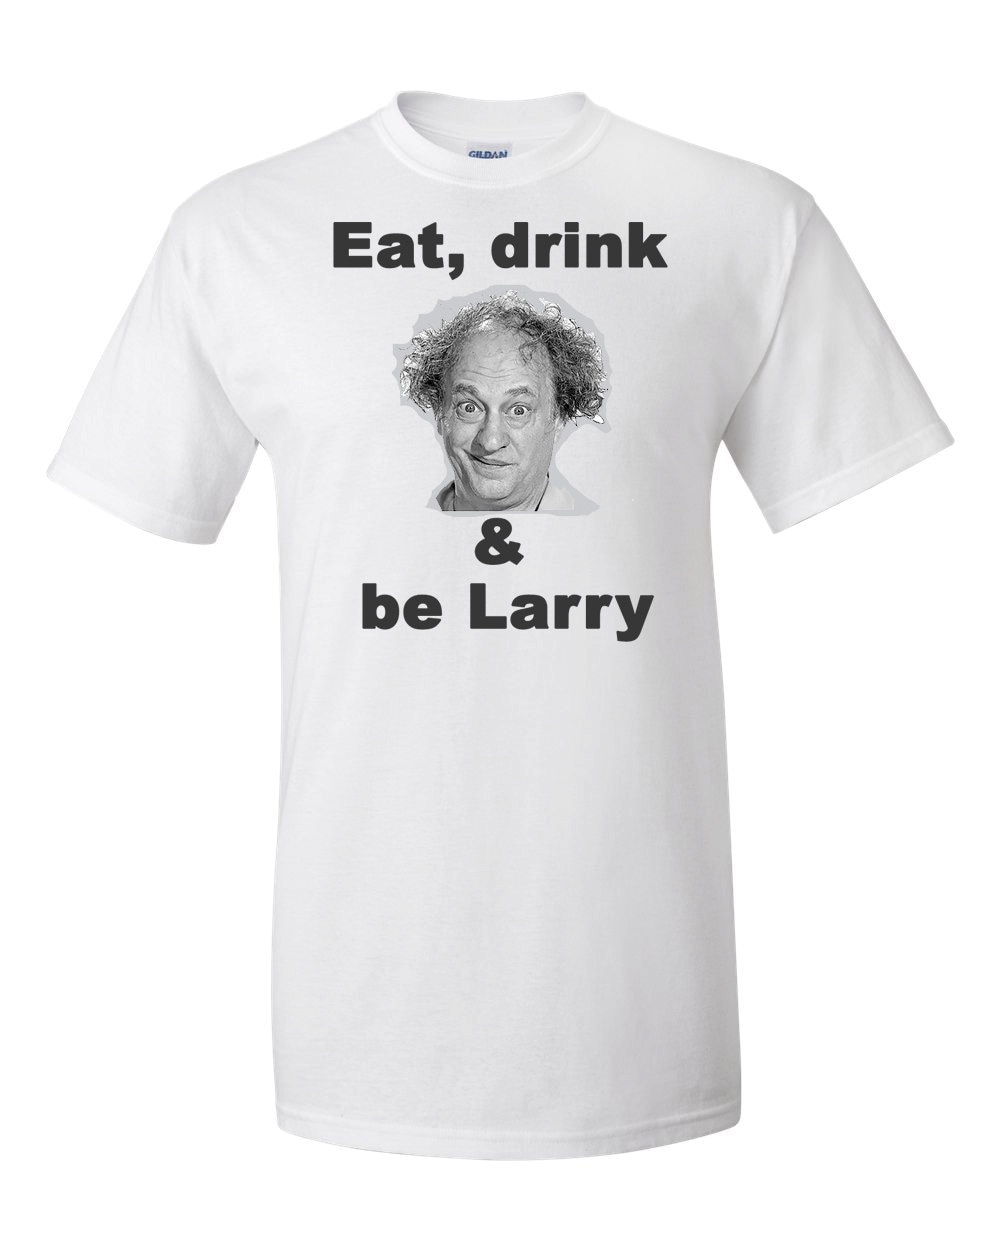 Eat Drink and be Larry Shirt Three Stooges Shirt 3 Stooges